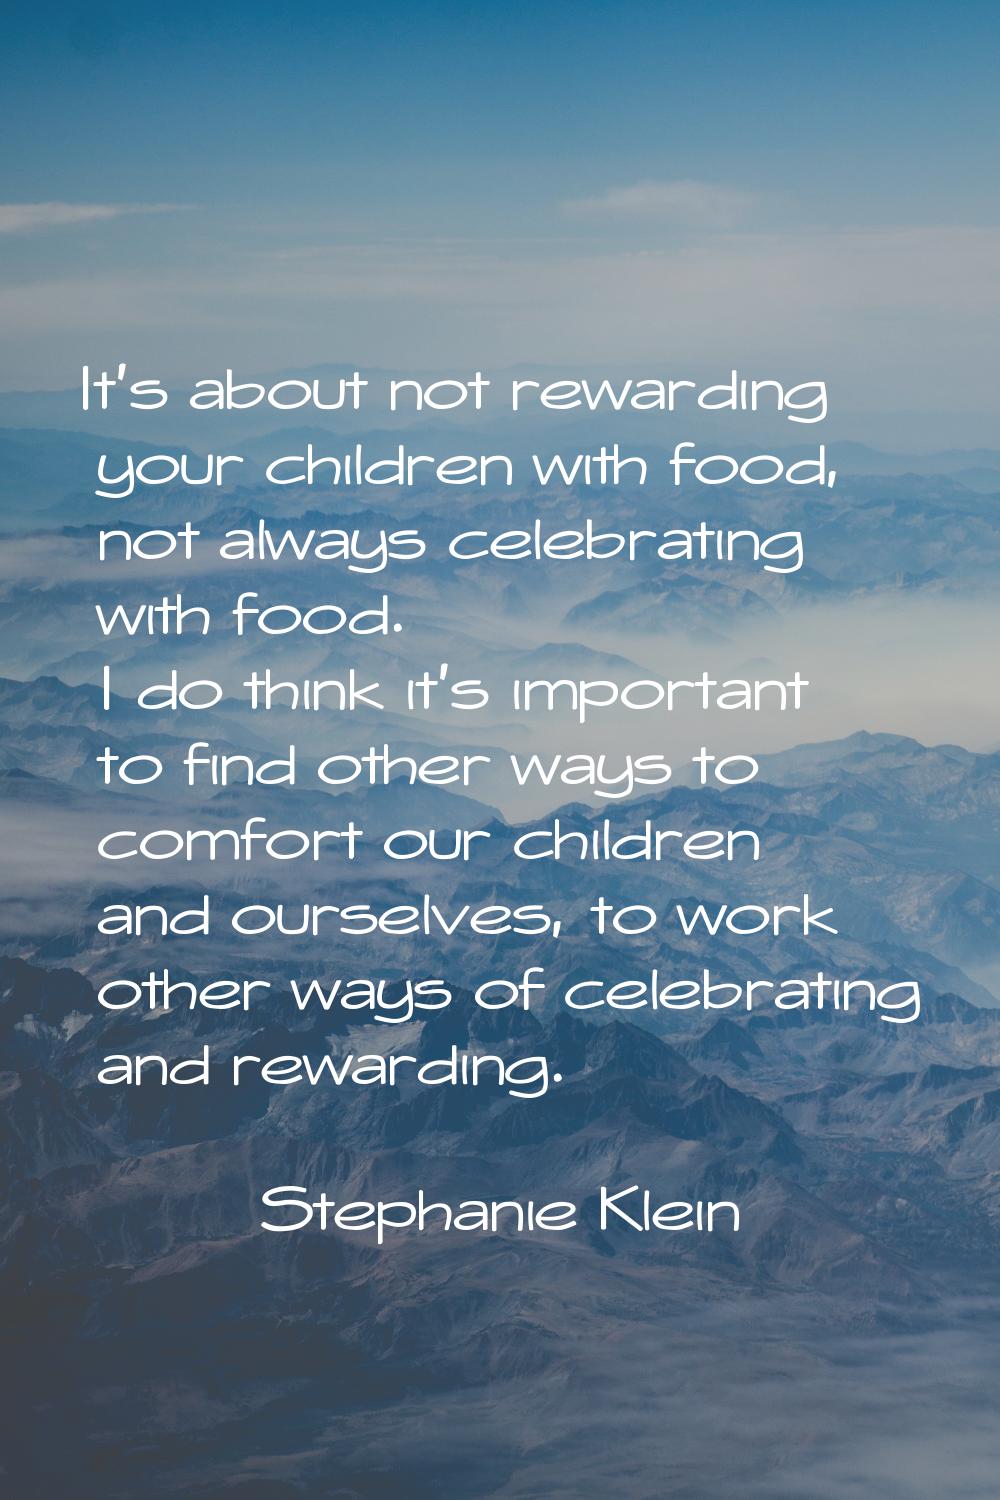 It's about not rewarding your children with food, not always celebrating with food. I do think it's